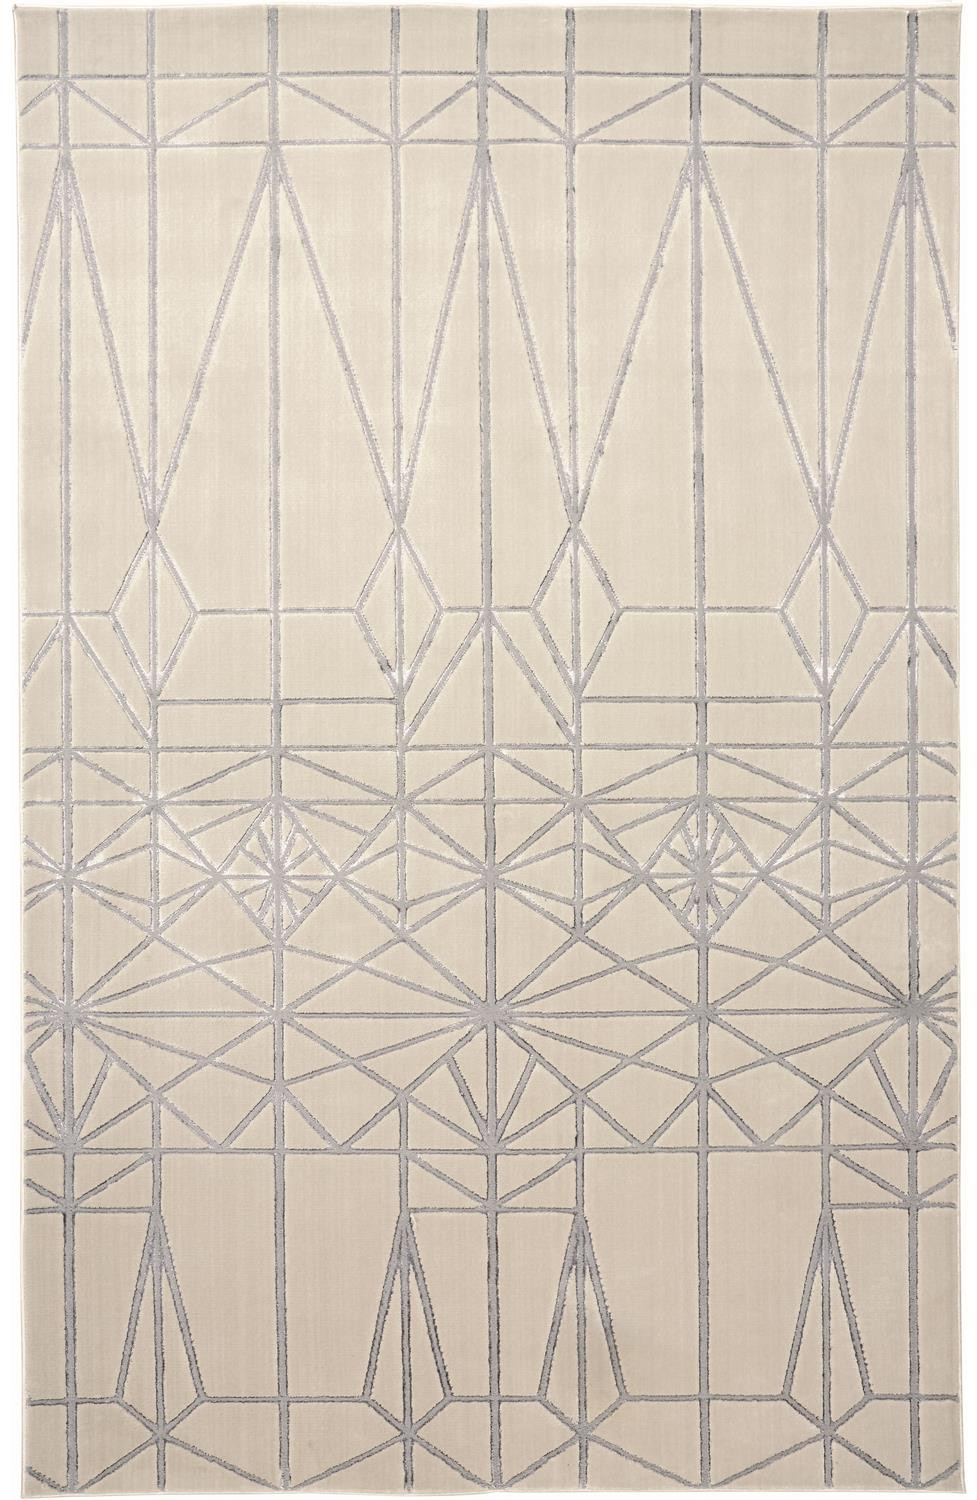 2' X 3' White Silver And Gray Geometric Stain Resistant Area Rug-511482-1